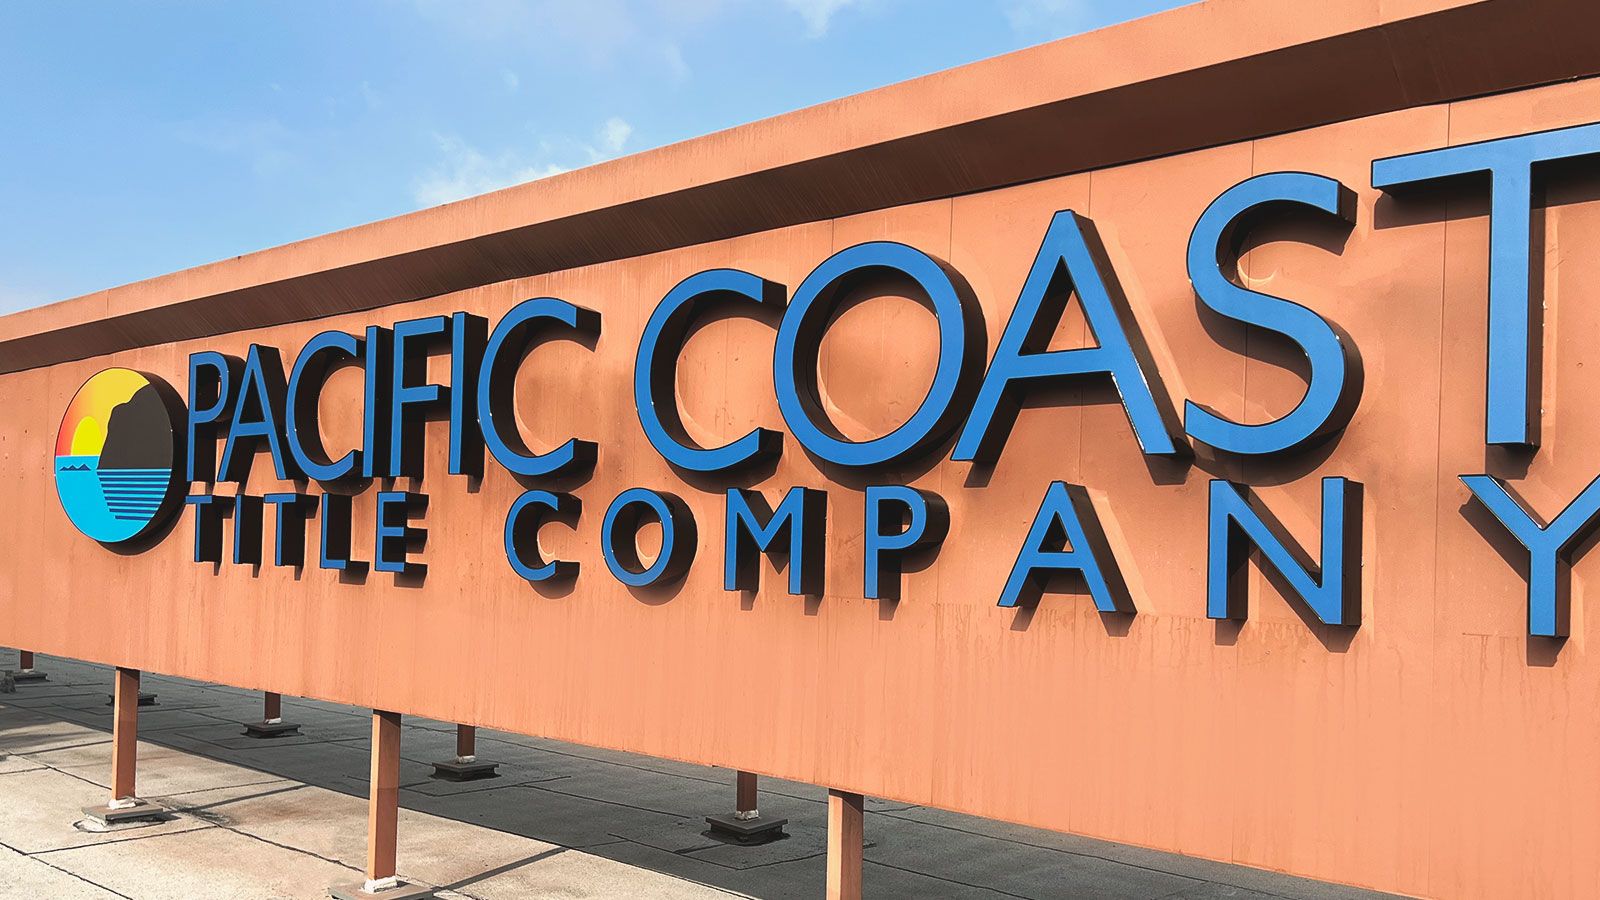 pacific coast title company channel letters